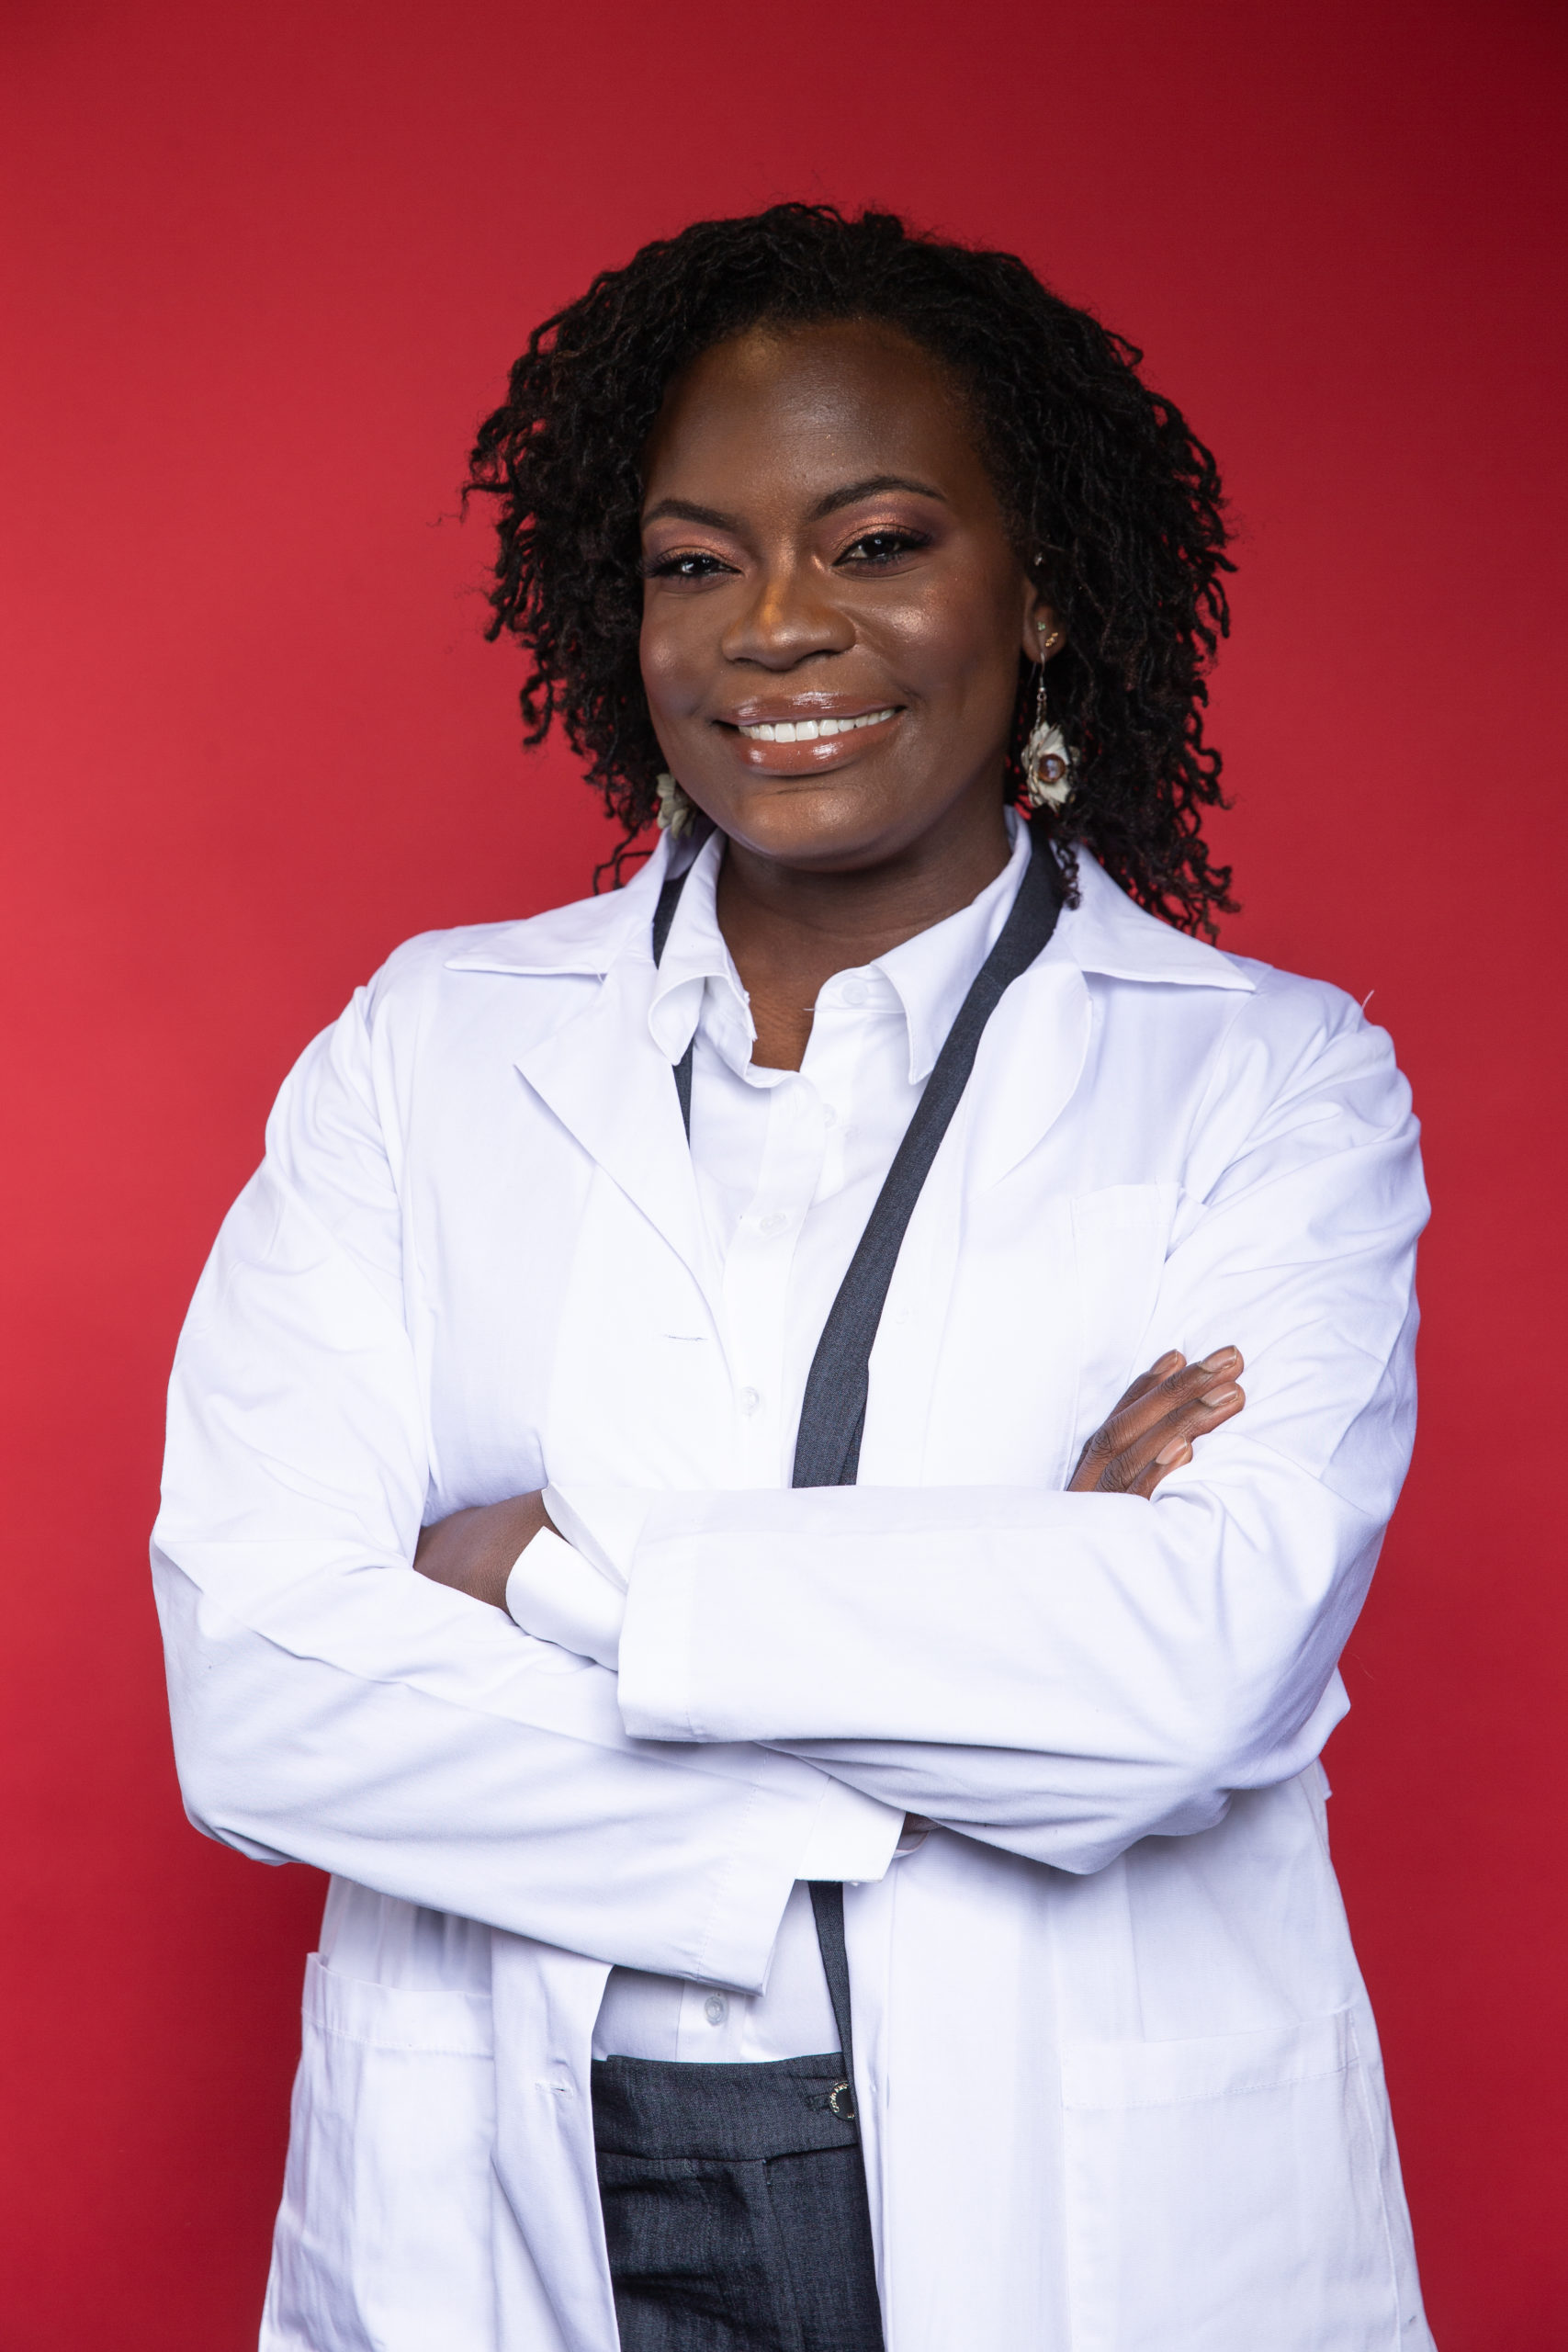 Raven the Science Maven Has a Message for Aspiring STEM Workers: Be Your Unapologetic Self